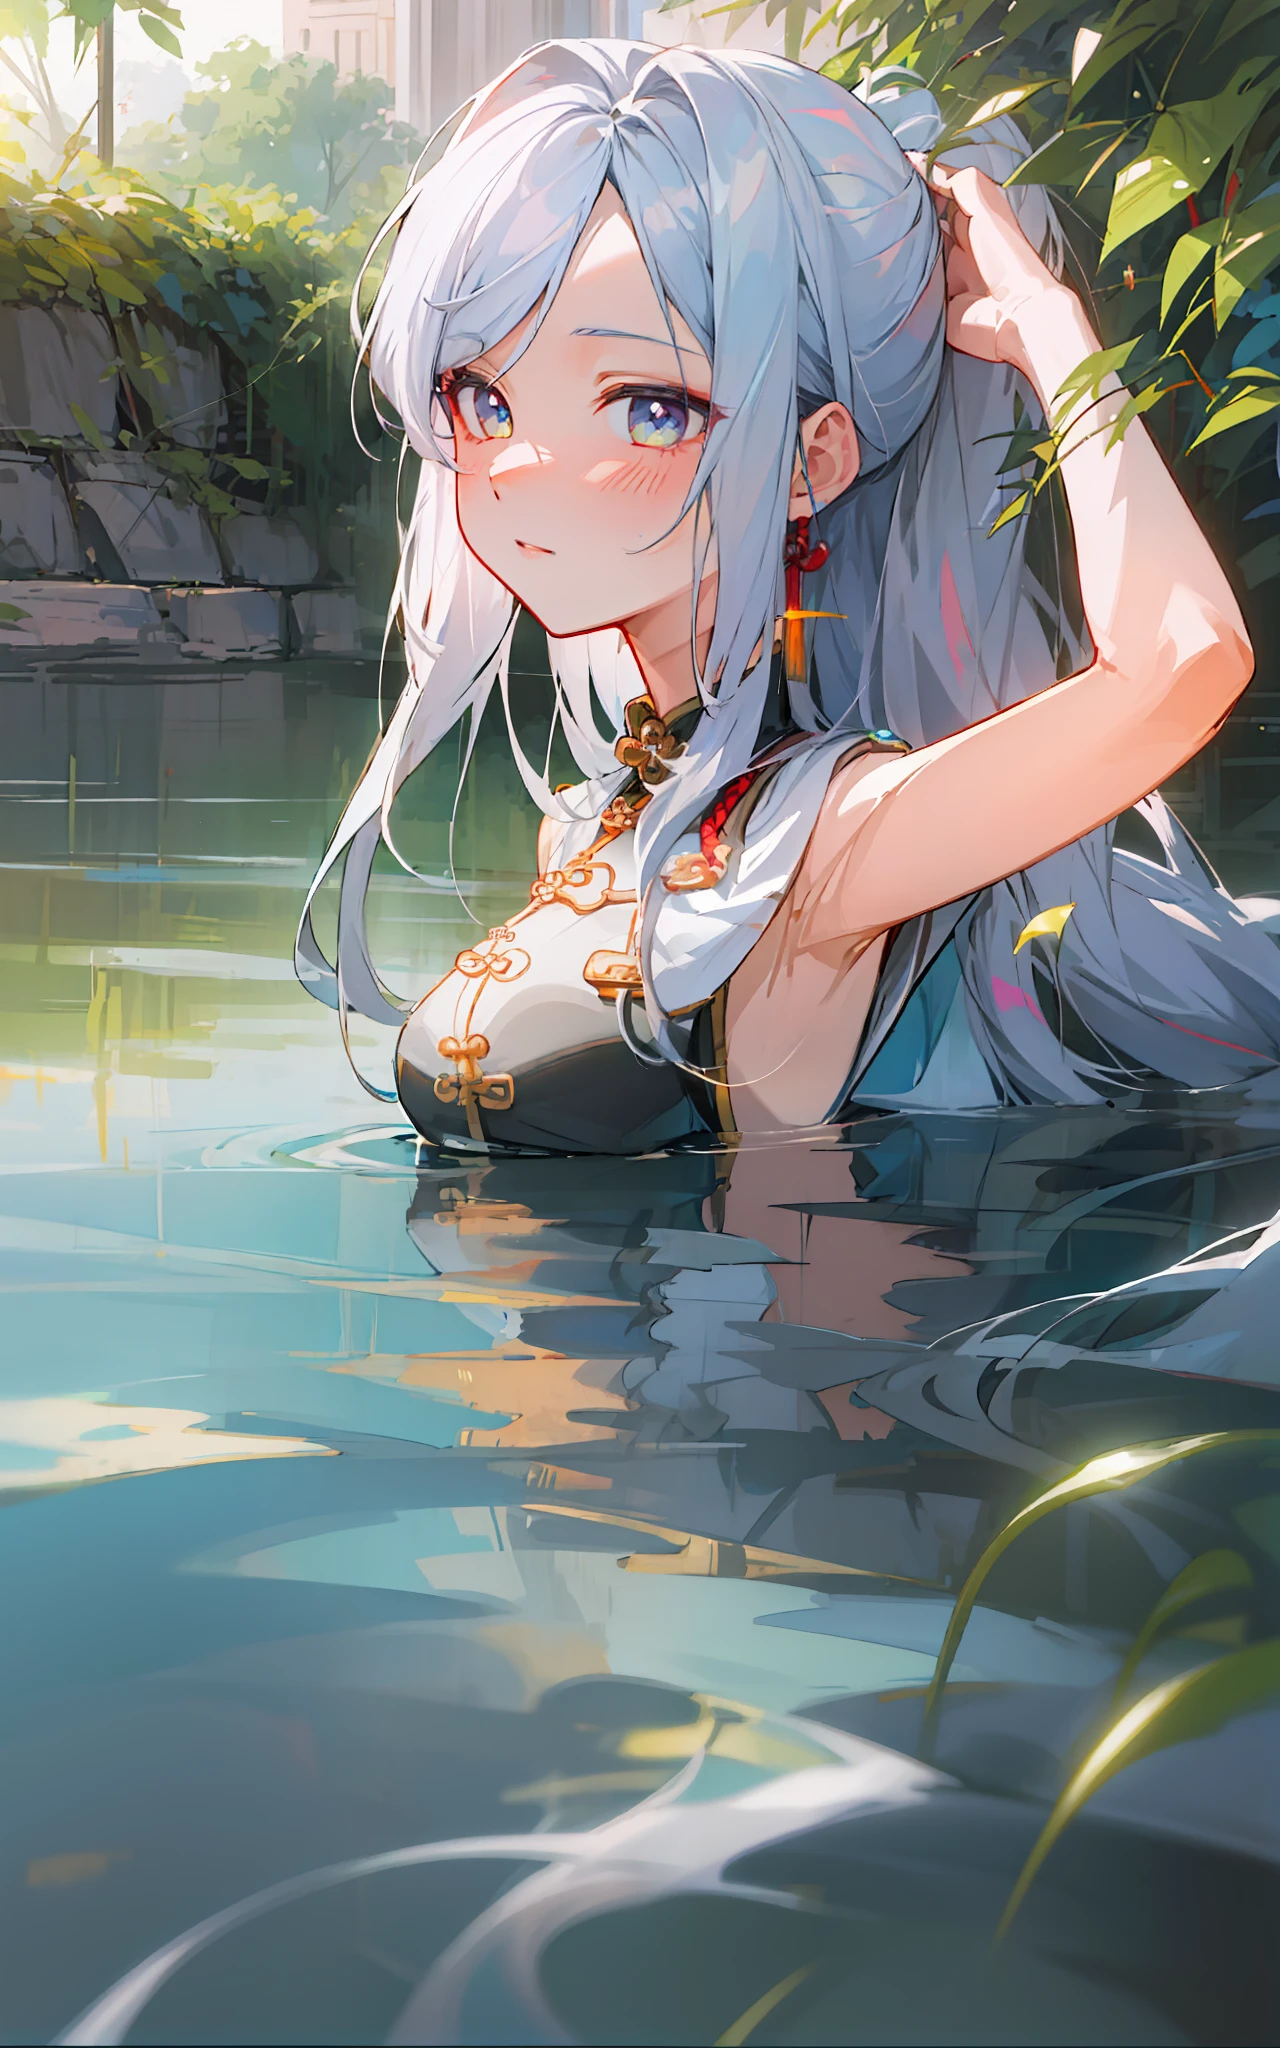 (((beautiful))), The ultra-High Image Quality --a, extremely detailed, CG digital painting style, High resolution 8K wallpaper, Guvez anime style, Long hair and blue eyes, Ponytail hairstyle, Beautiful girl in brocade